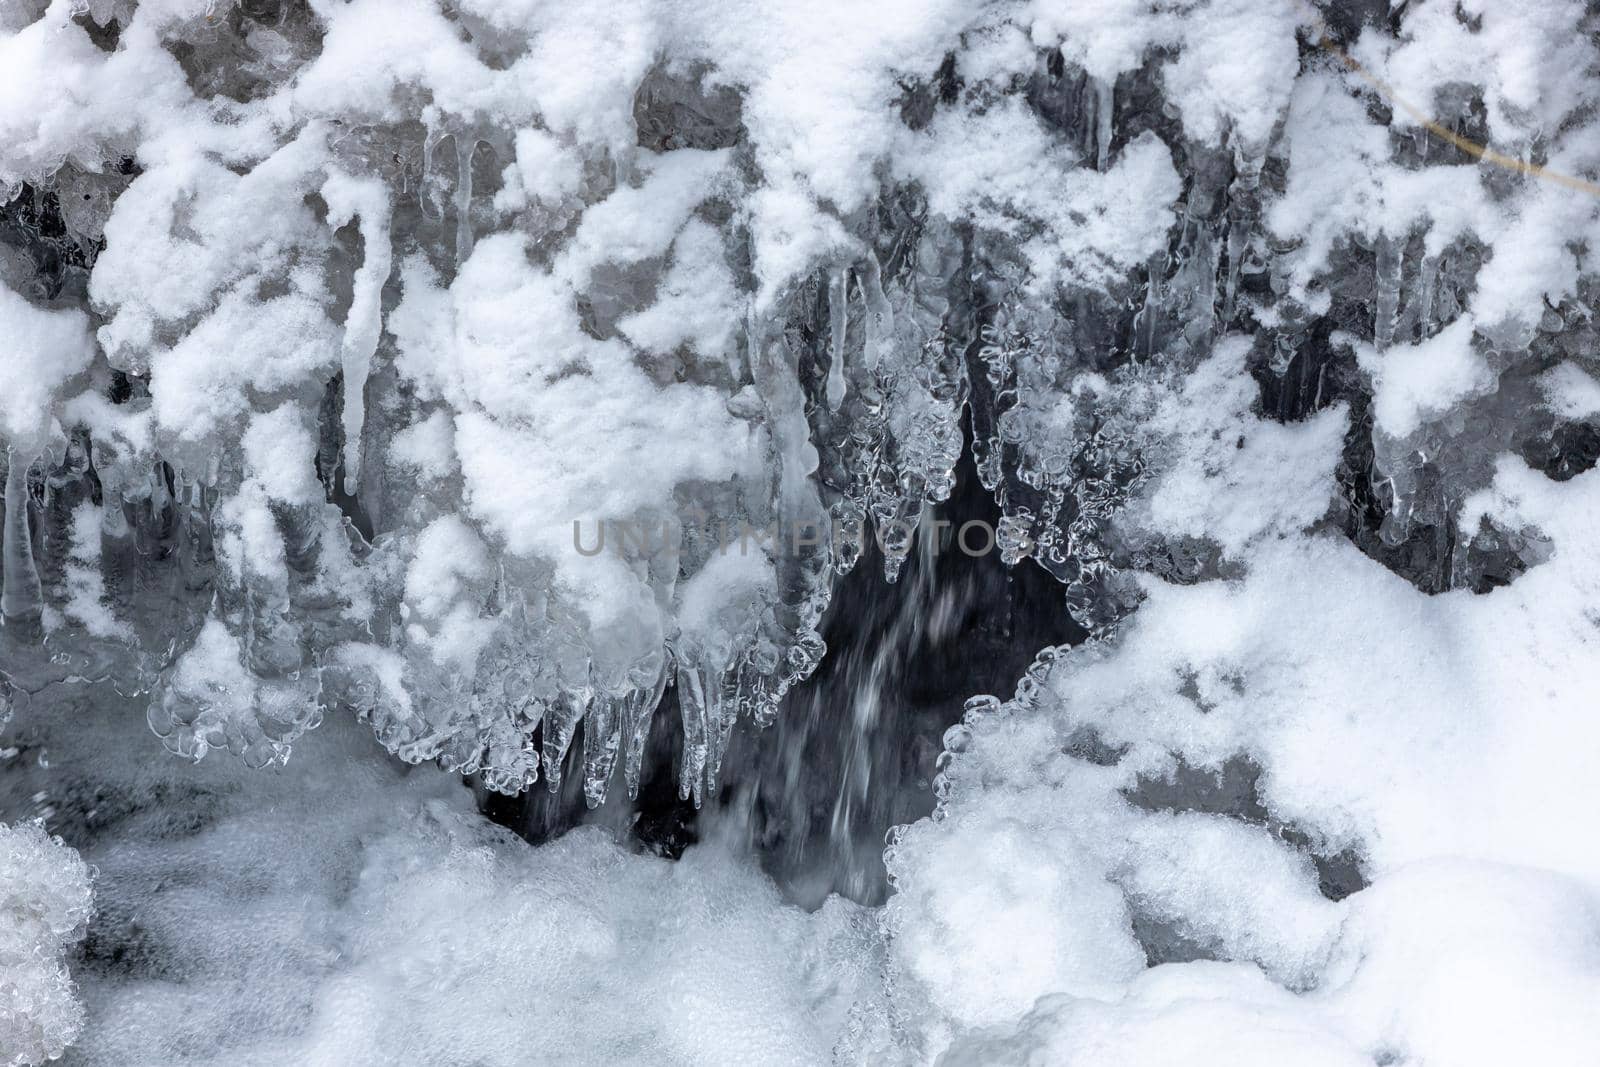 Icicles, ice formations at Tiefenbach near Bernkastel-Kues on the Mosel